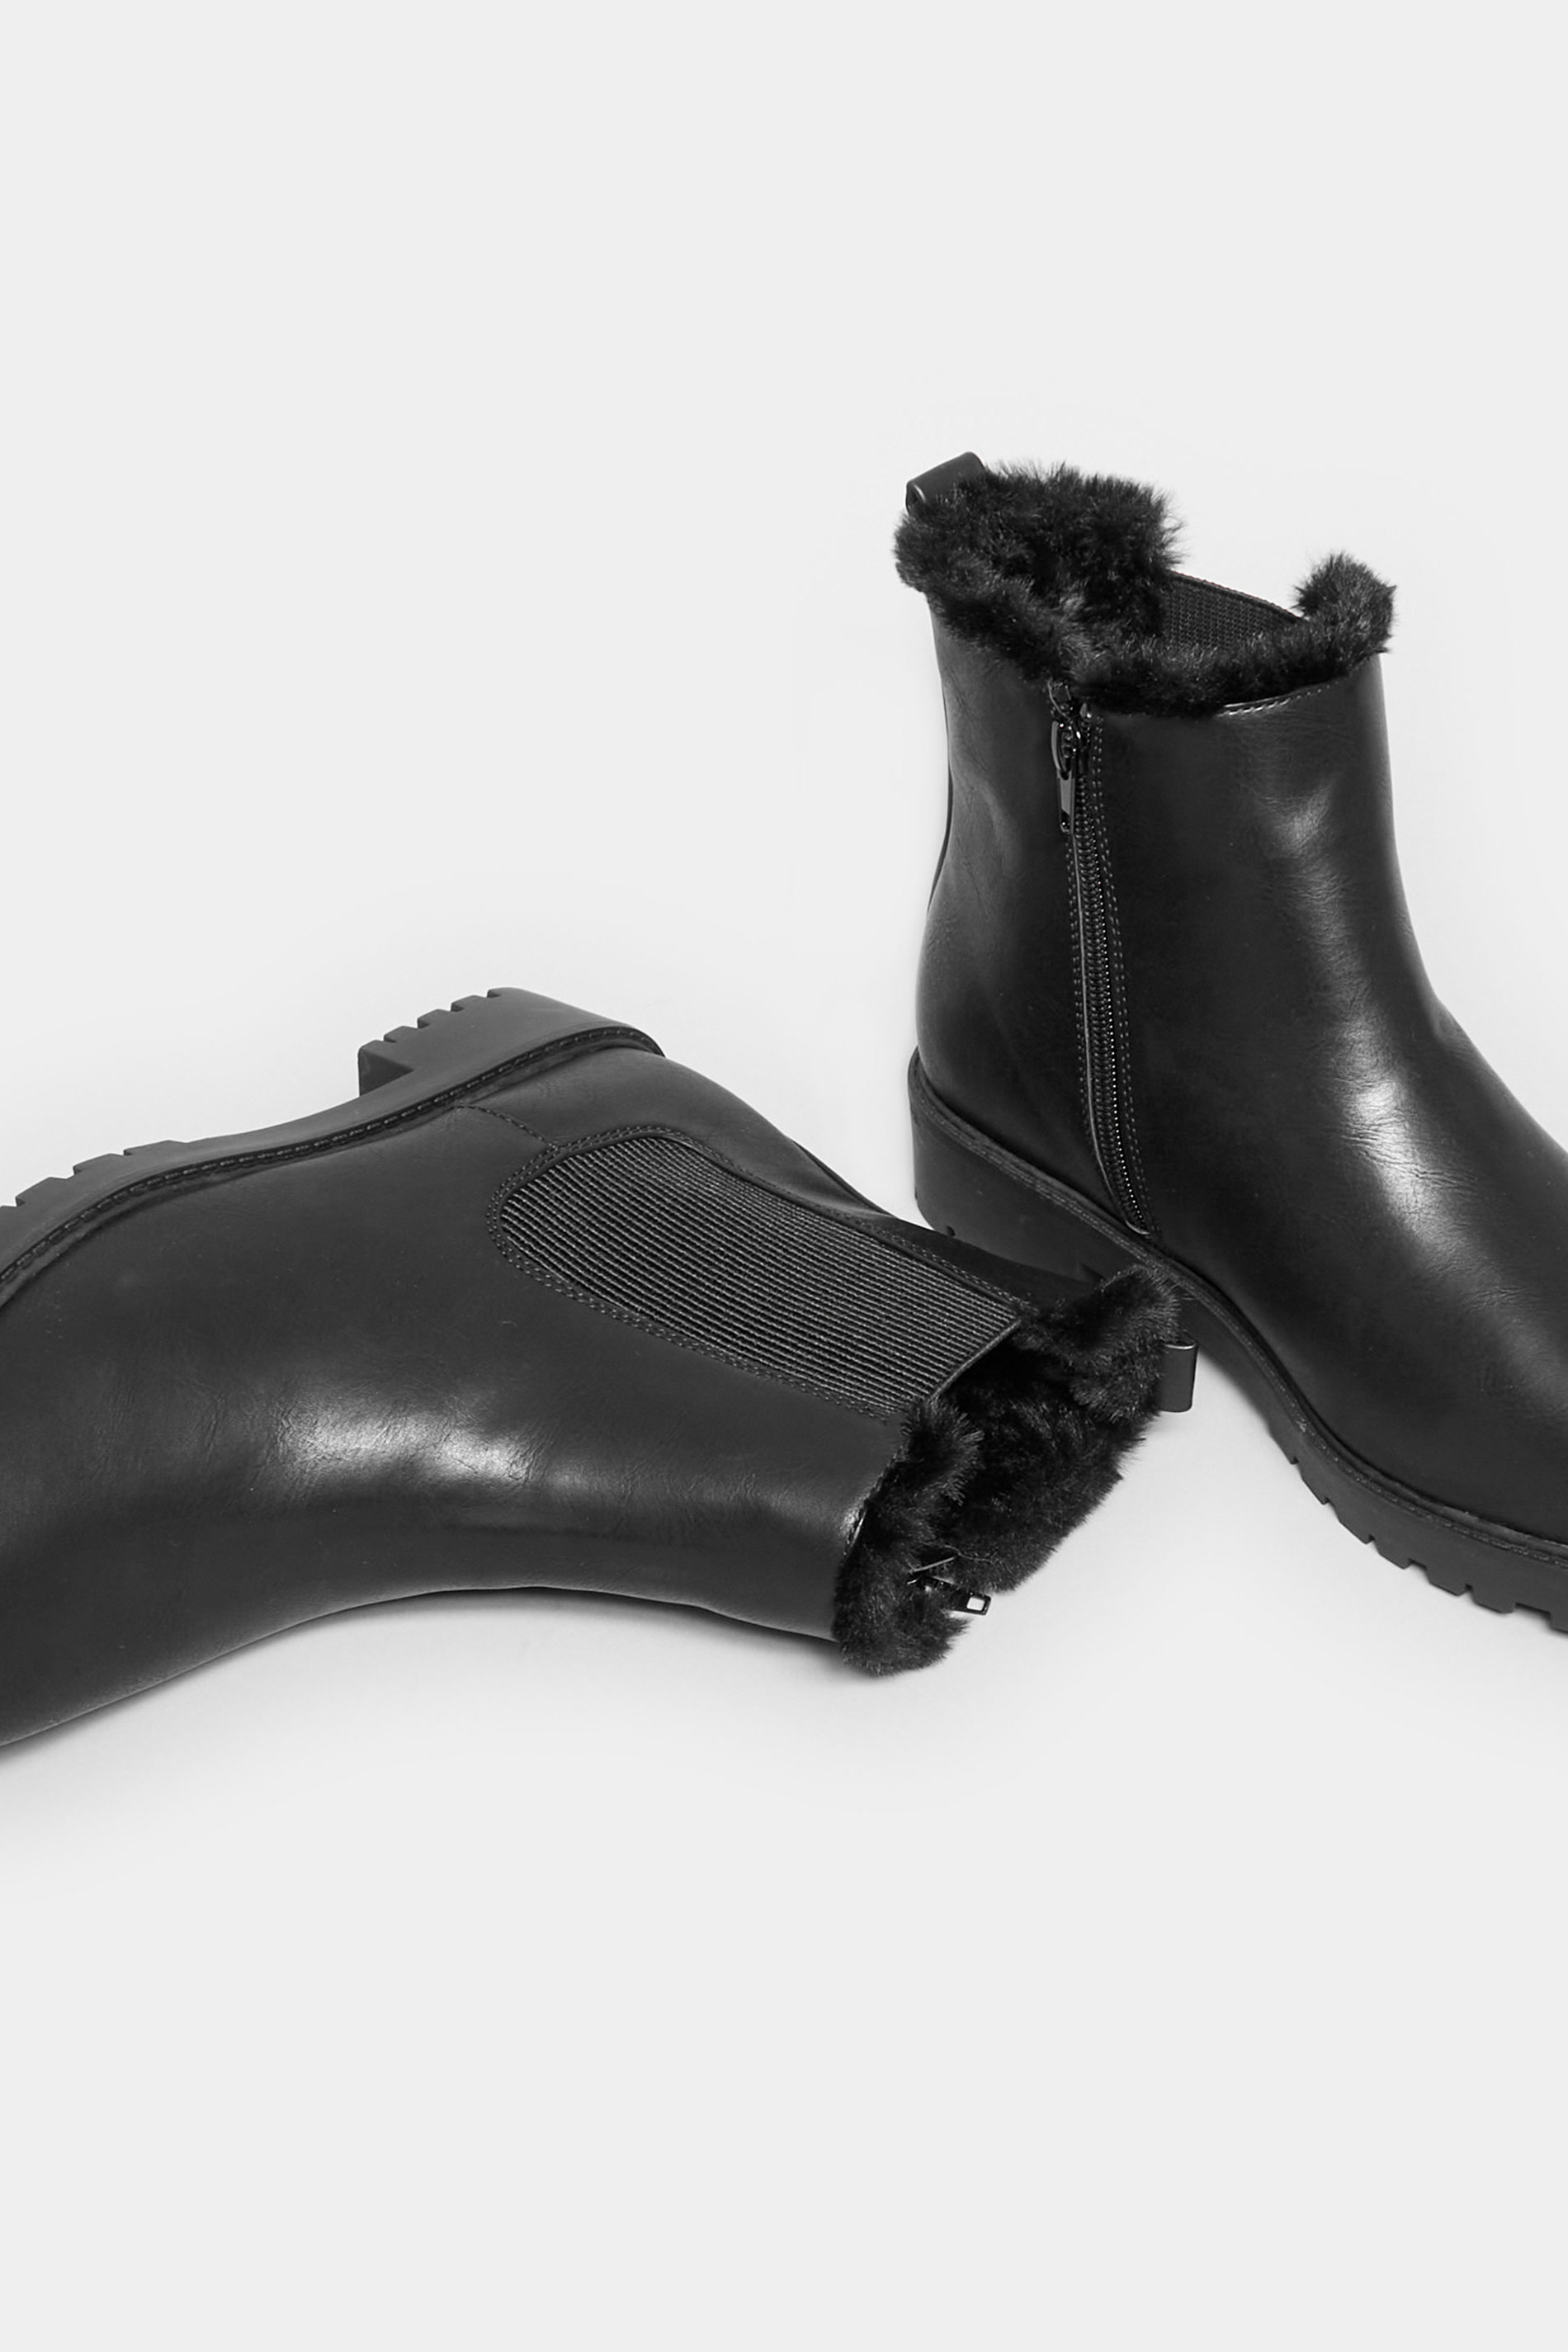 Black Faux Fur Chelsea Boots In Wide E Fit & Wide EEE Fit | Yours Clothing